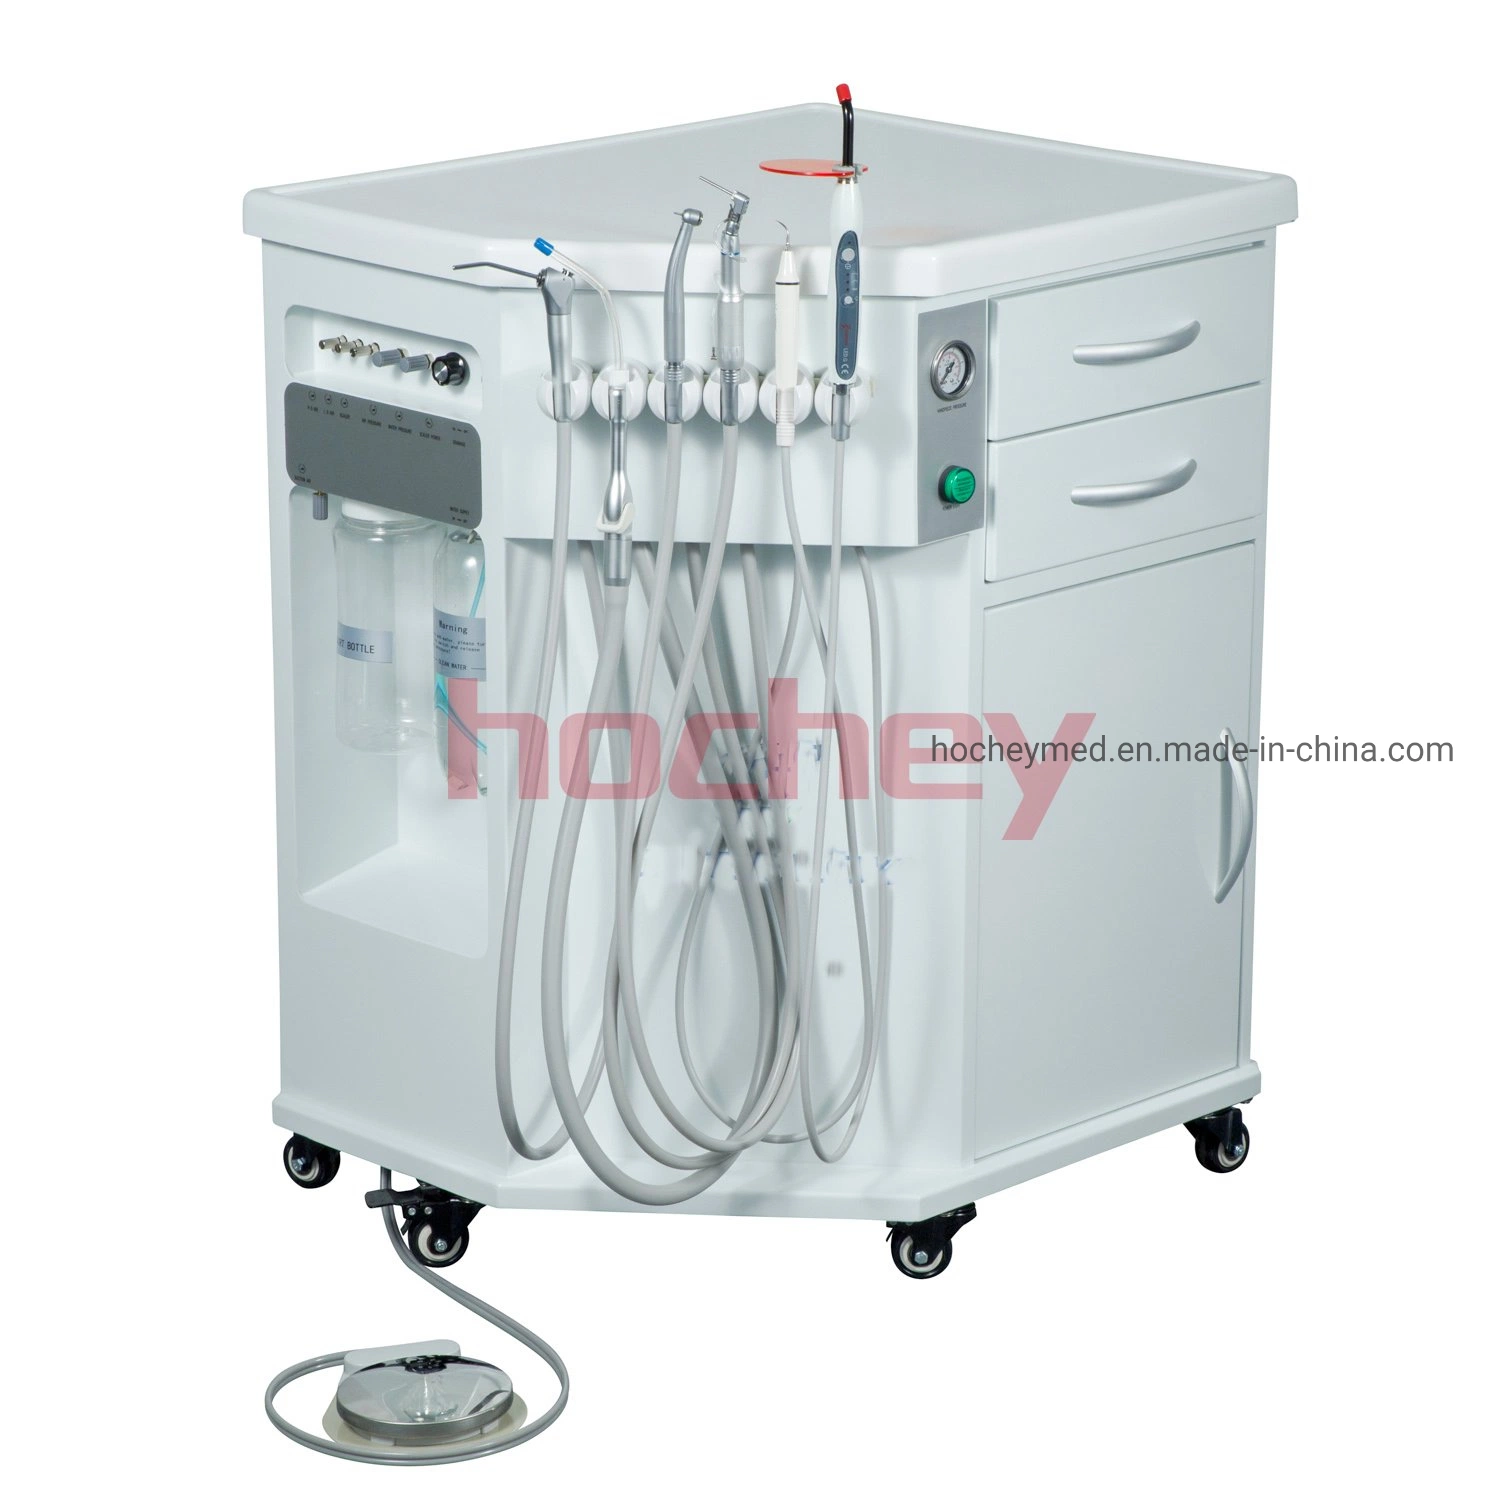 Hochey Medical China Best Price Mobile Dentist Chair Portable Dental Unit for Dental Clinic